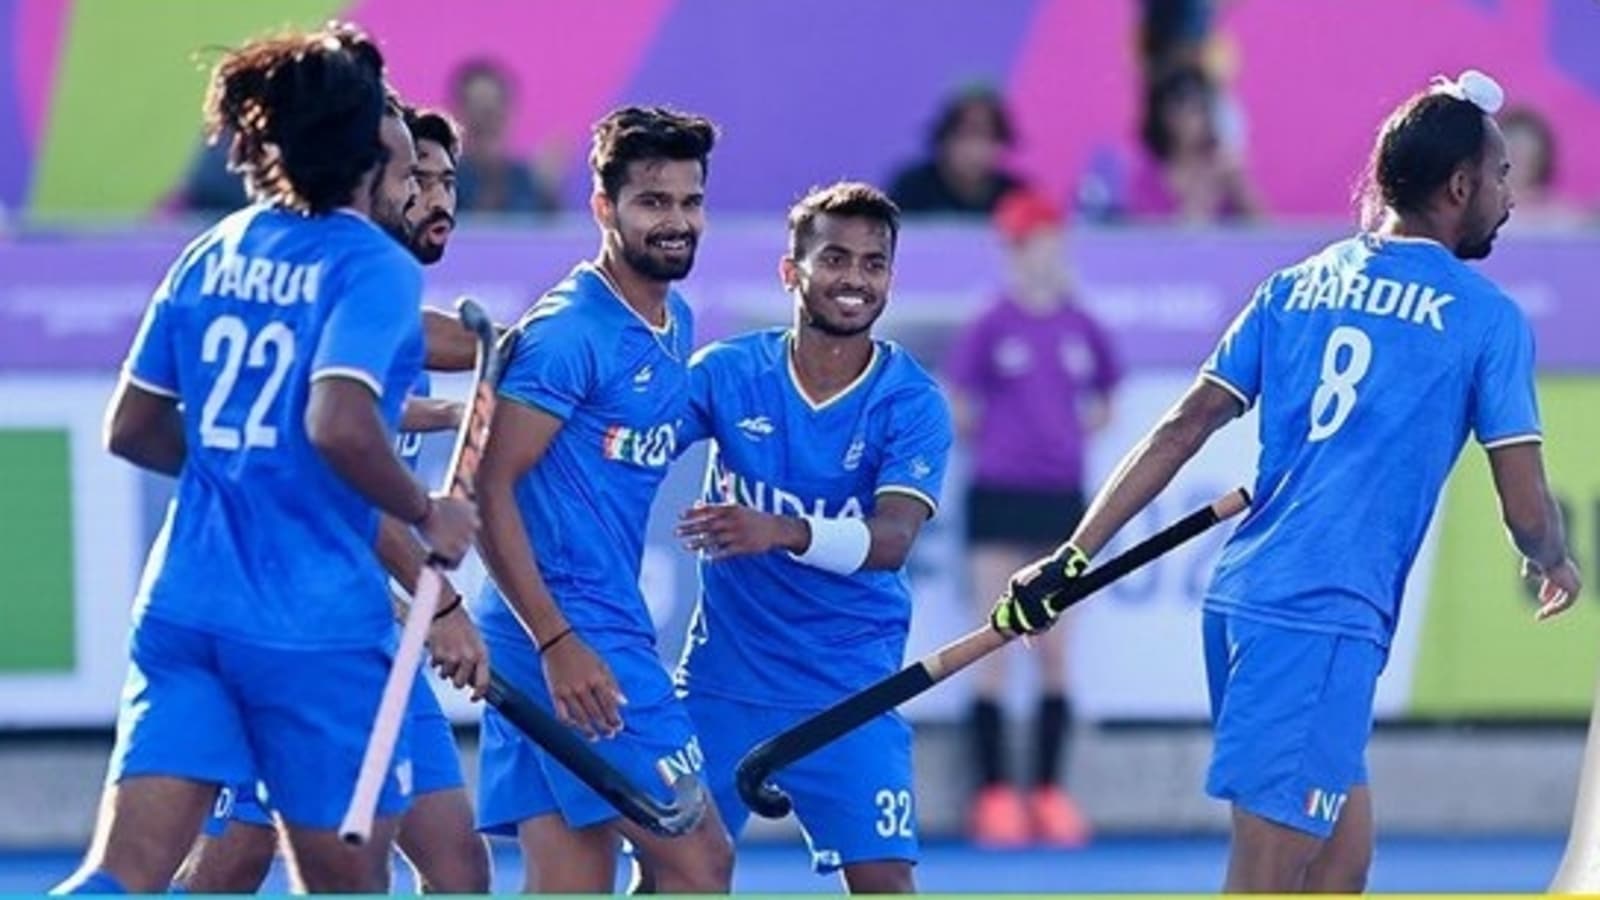 Commonwealth Games 2022 Live TV Streaming Online- Watch India Vs Australia Mens Hockey Final Match online on laptop and mobile Tech News